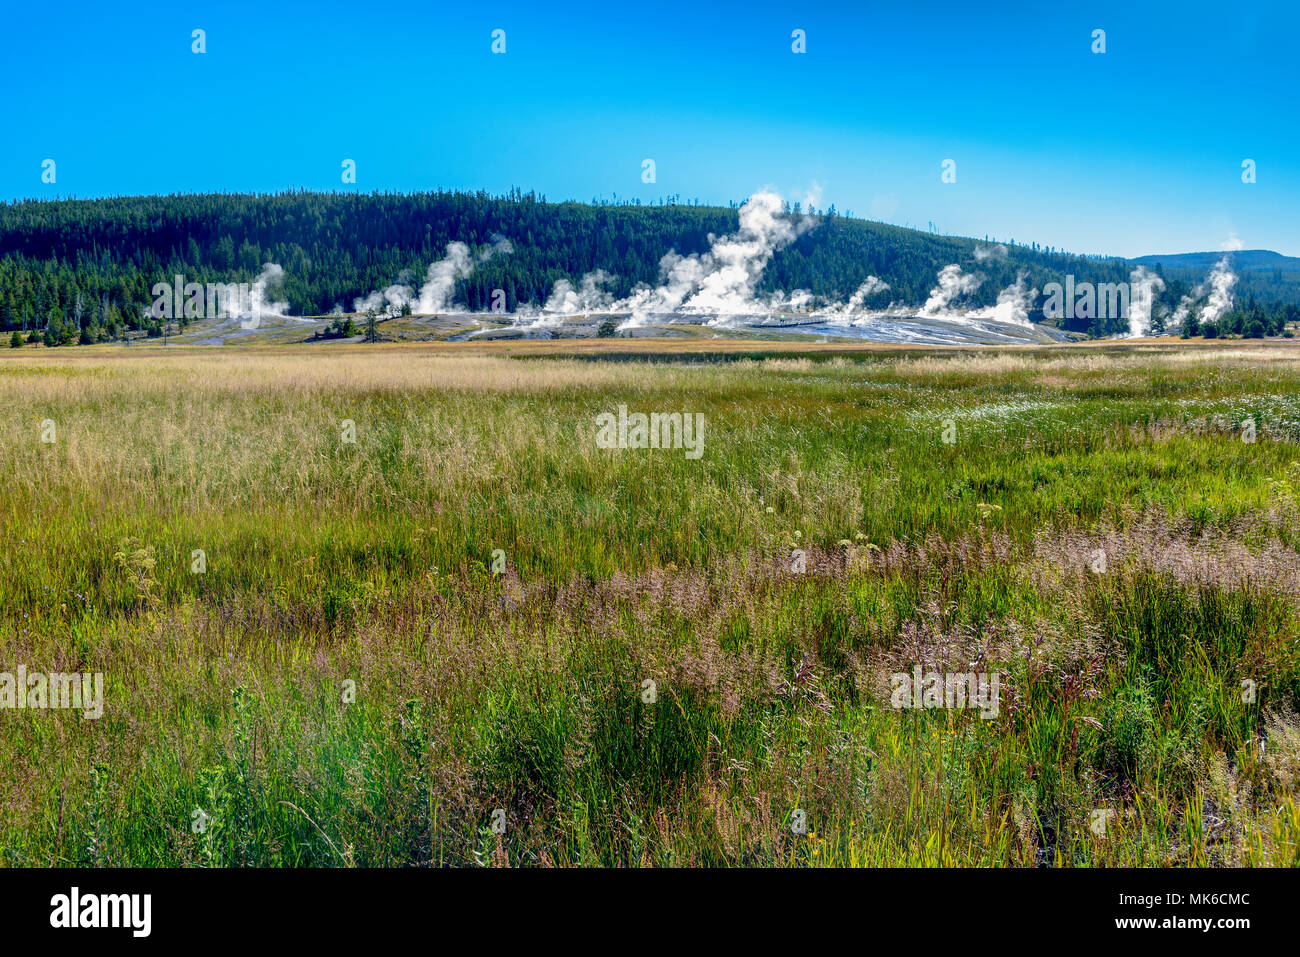 Meadows with green grass and erupting geysers in background under bright blue sky. Stock Photo